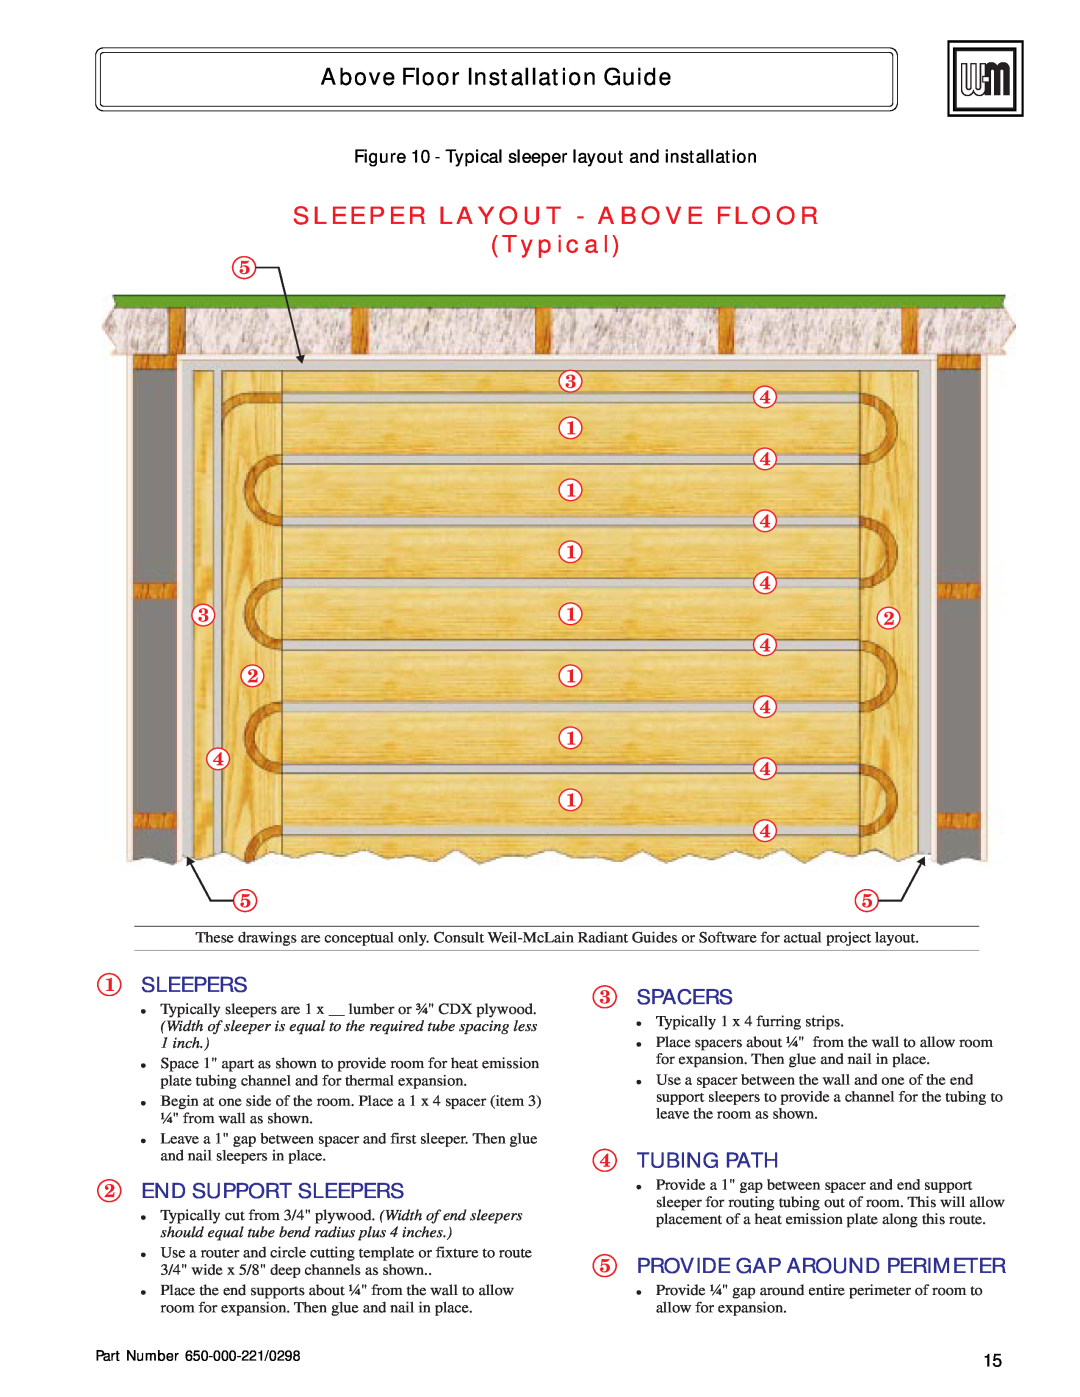 Weil-McLain Radiant Heater SLEEPER LAYOUT - ABOVE FLOOR Typical, 1SLEEPERS, 2END SUPPORT SLEEPERS, 3SPACERS, 4TUBING PATH 